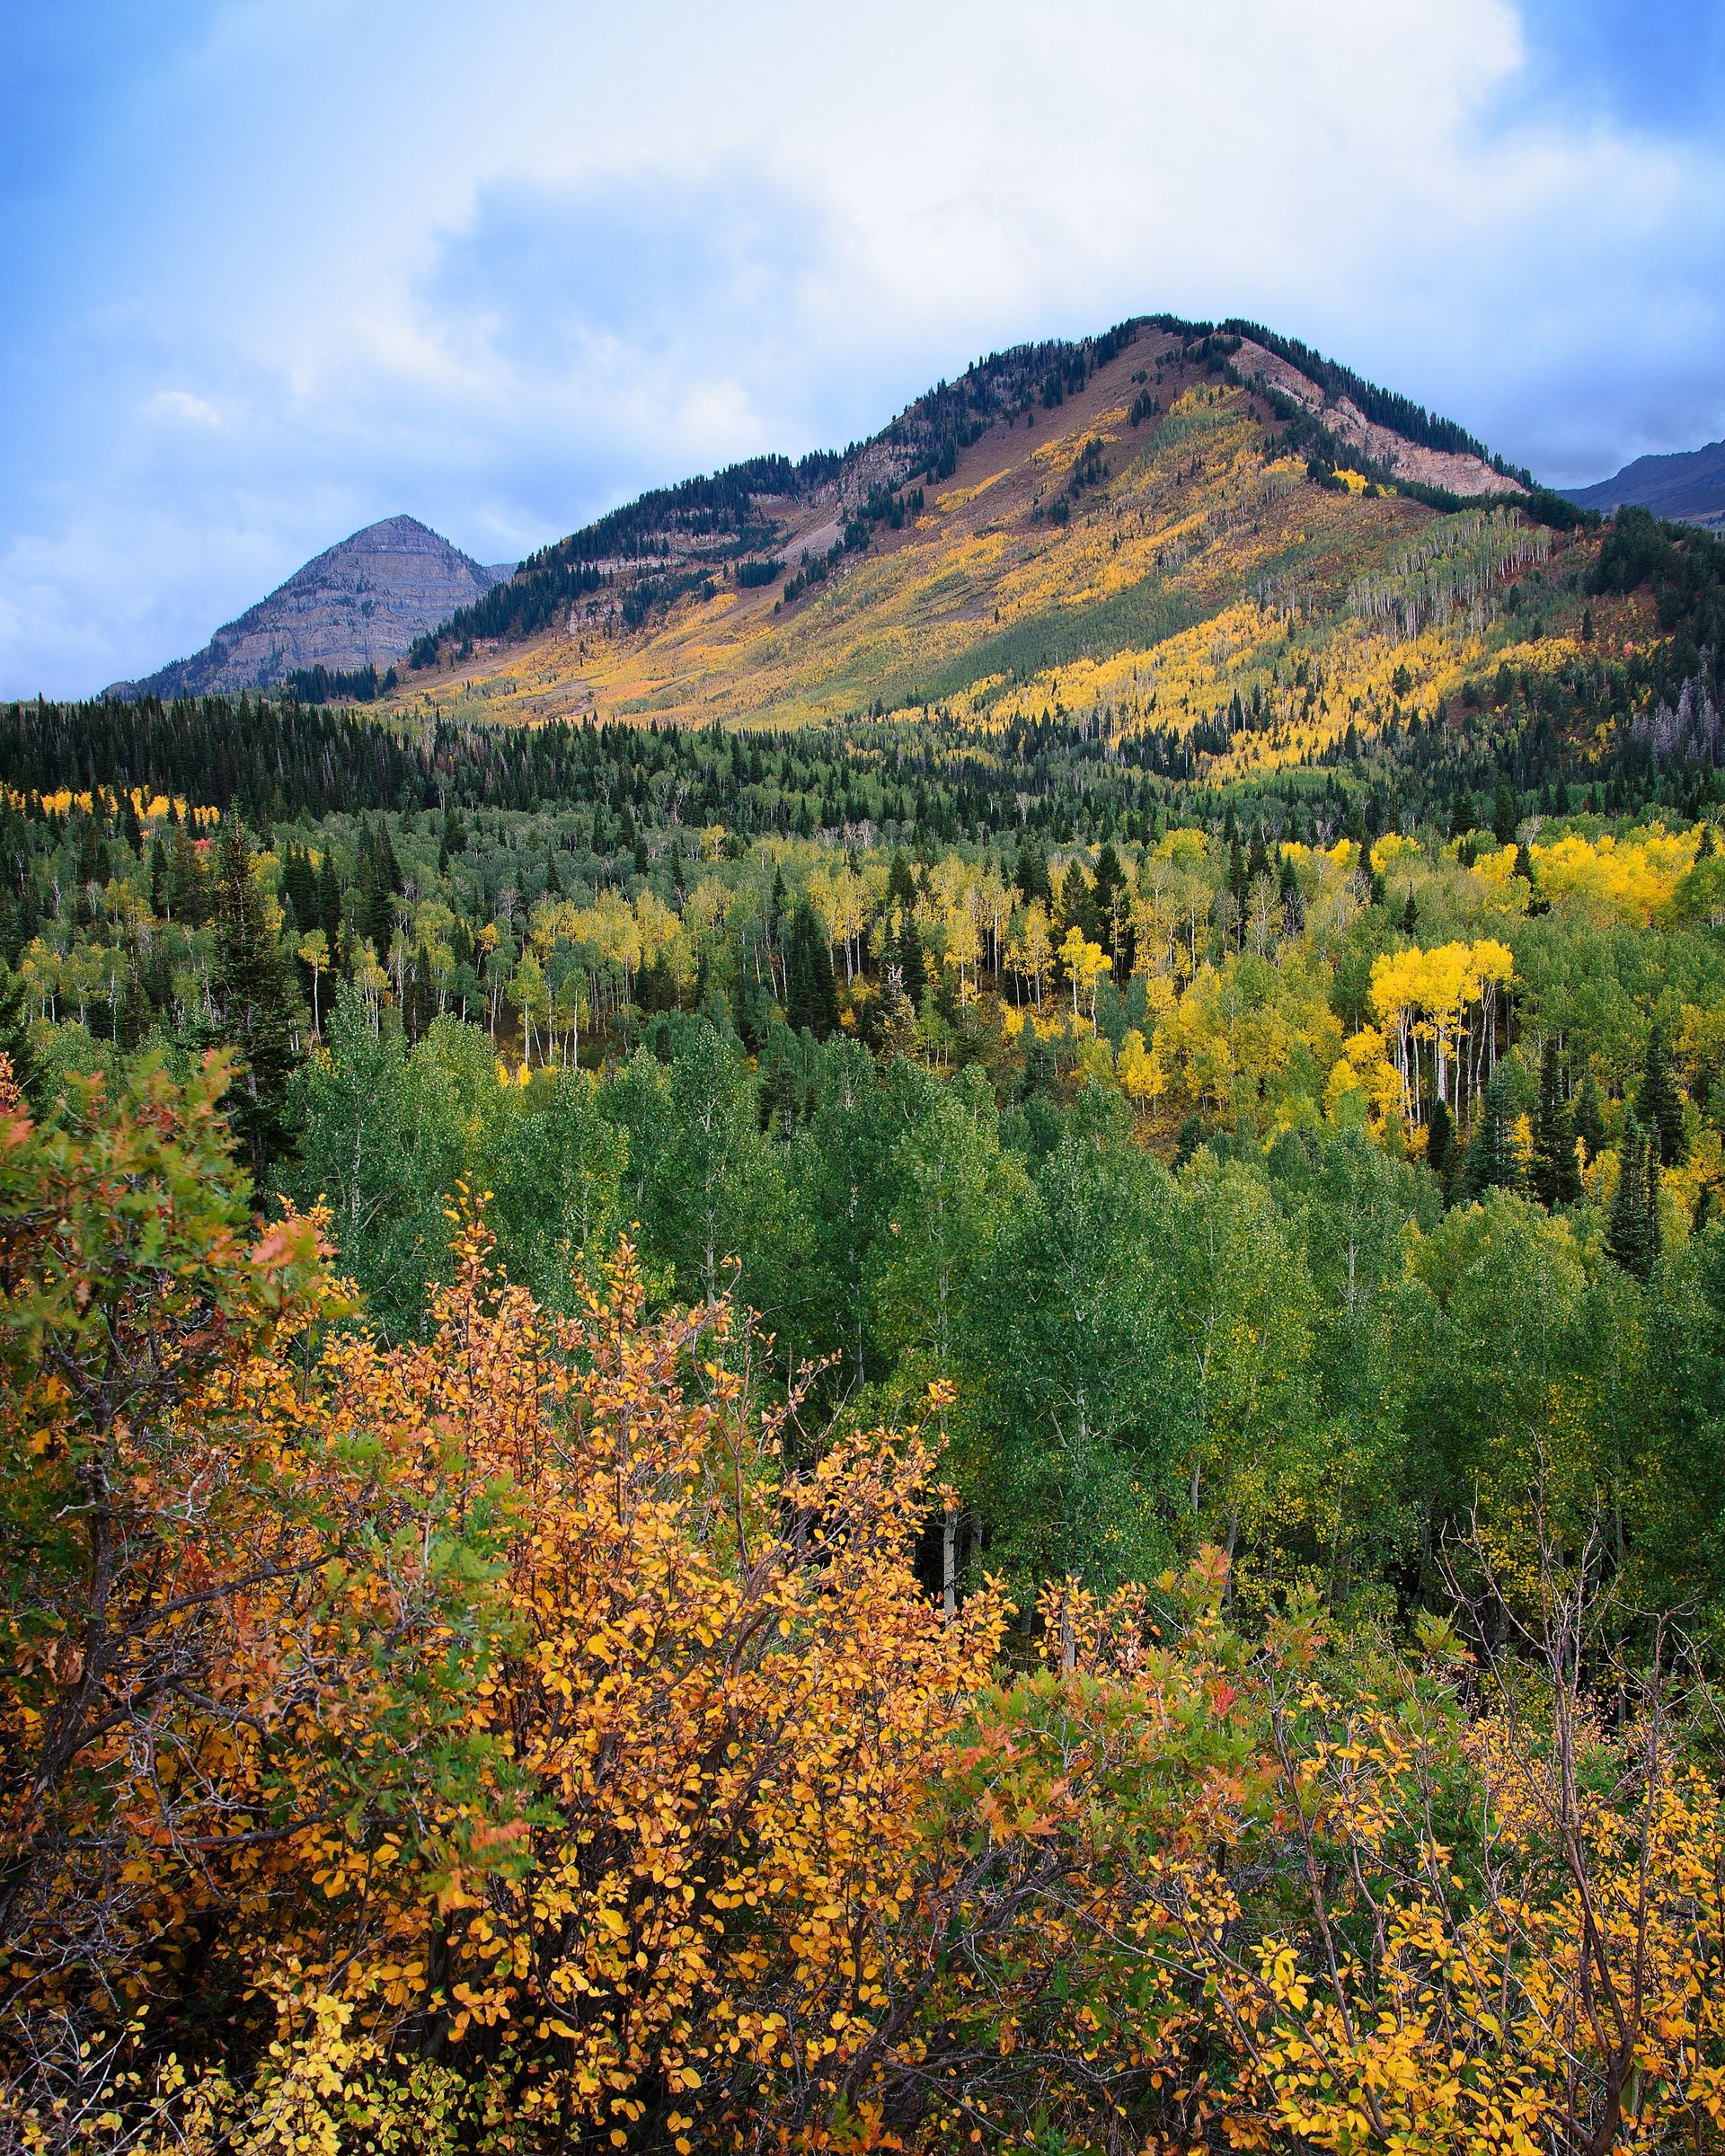 A mountain scene with yellow trees scattered throughout the forest.